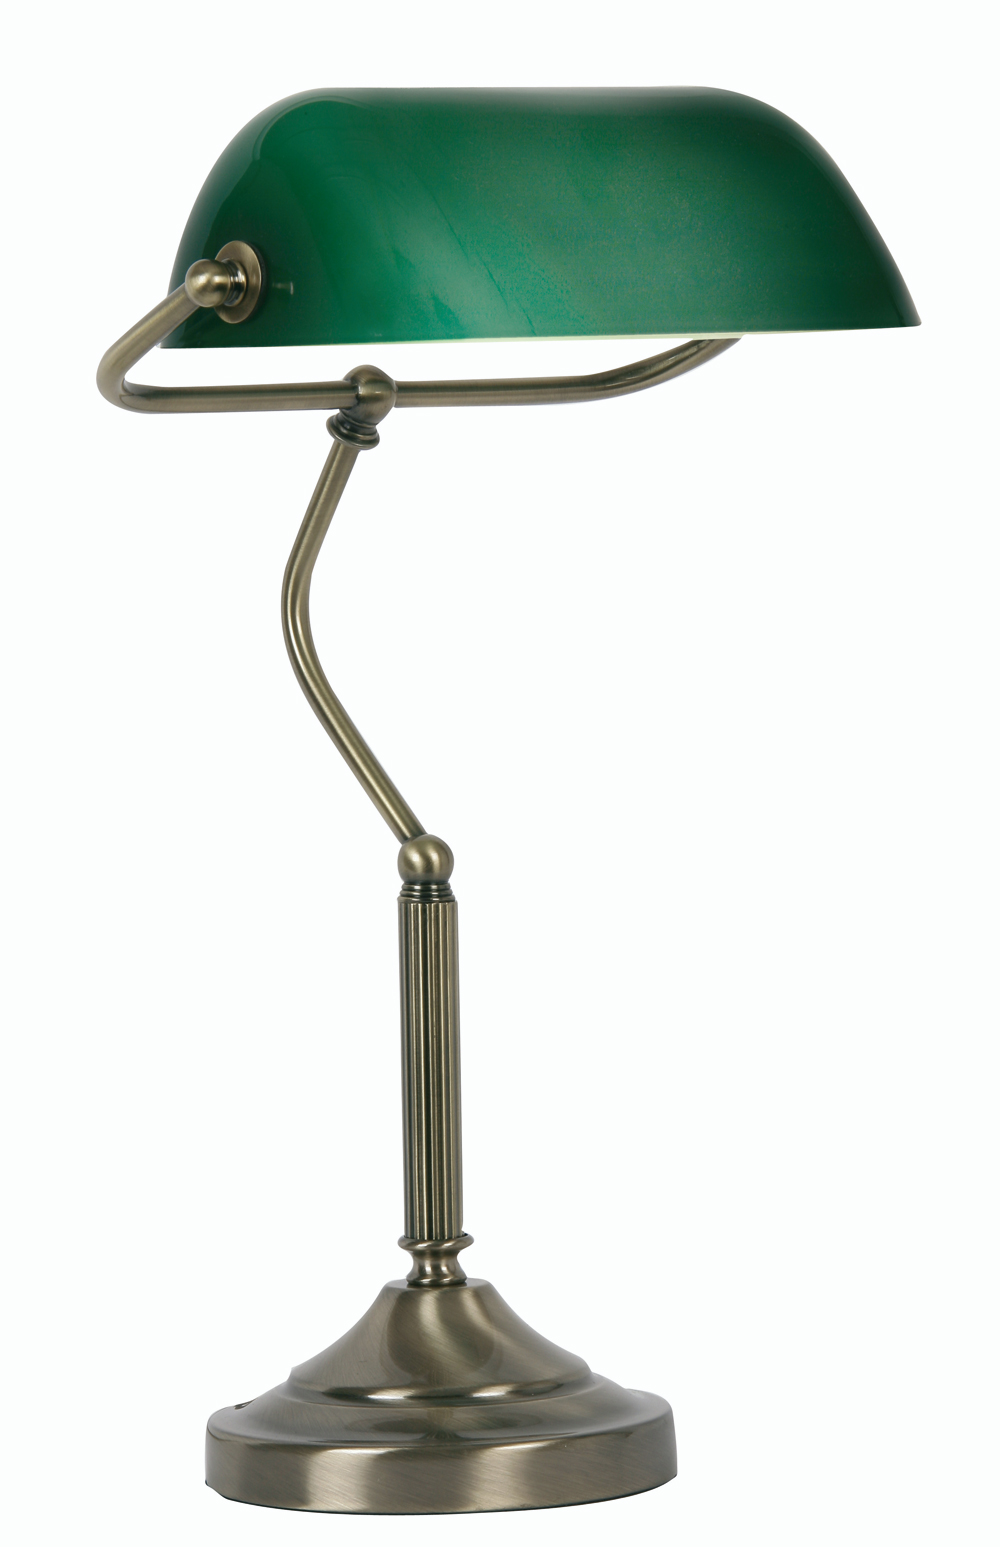 solid brass bankers lamp